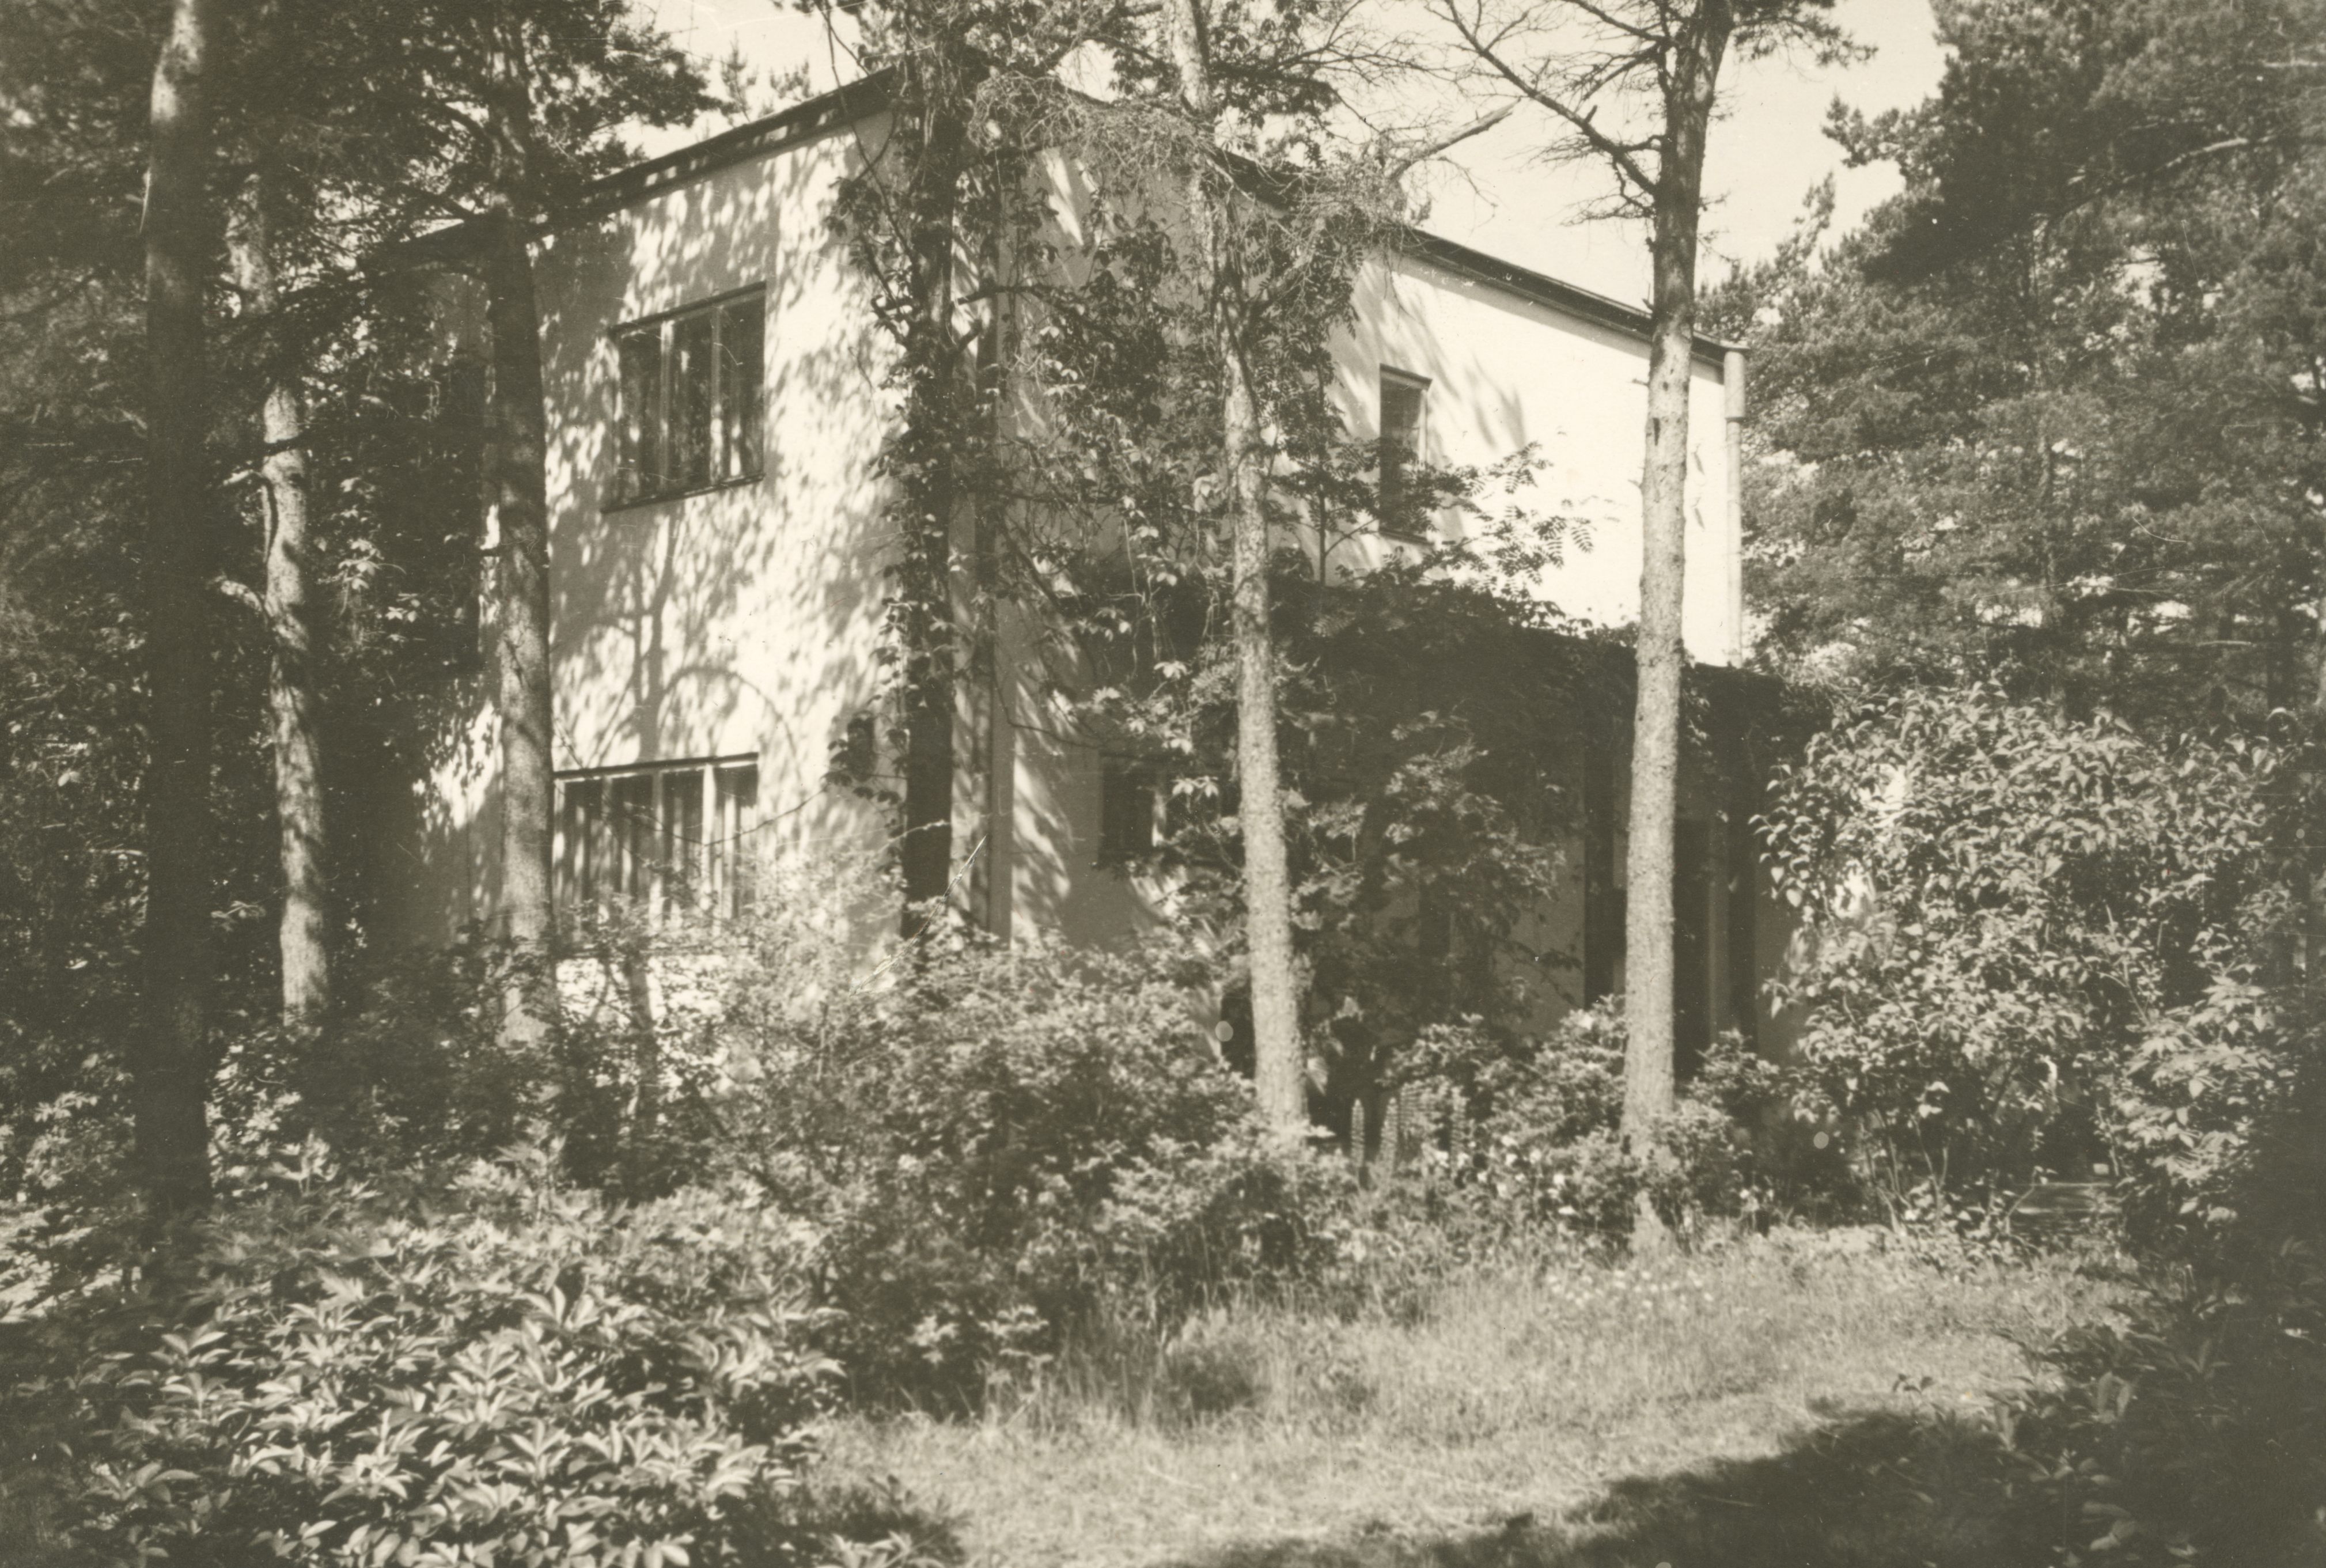 Marie Under and Artur Adson's home in Nõmmel, Freedom pst. 12 years 1933-1944